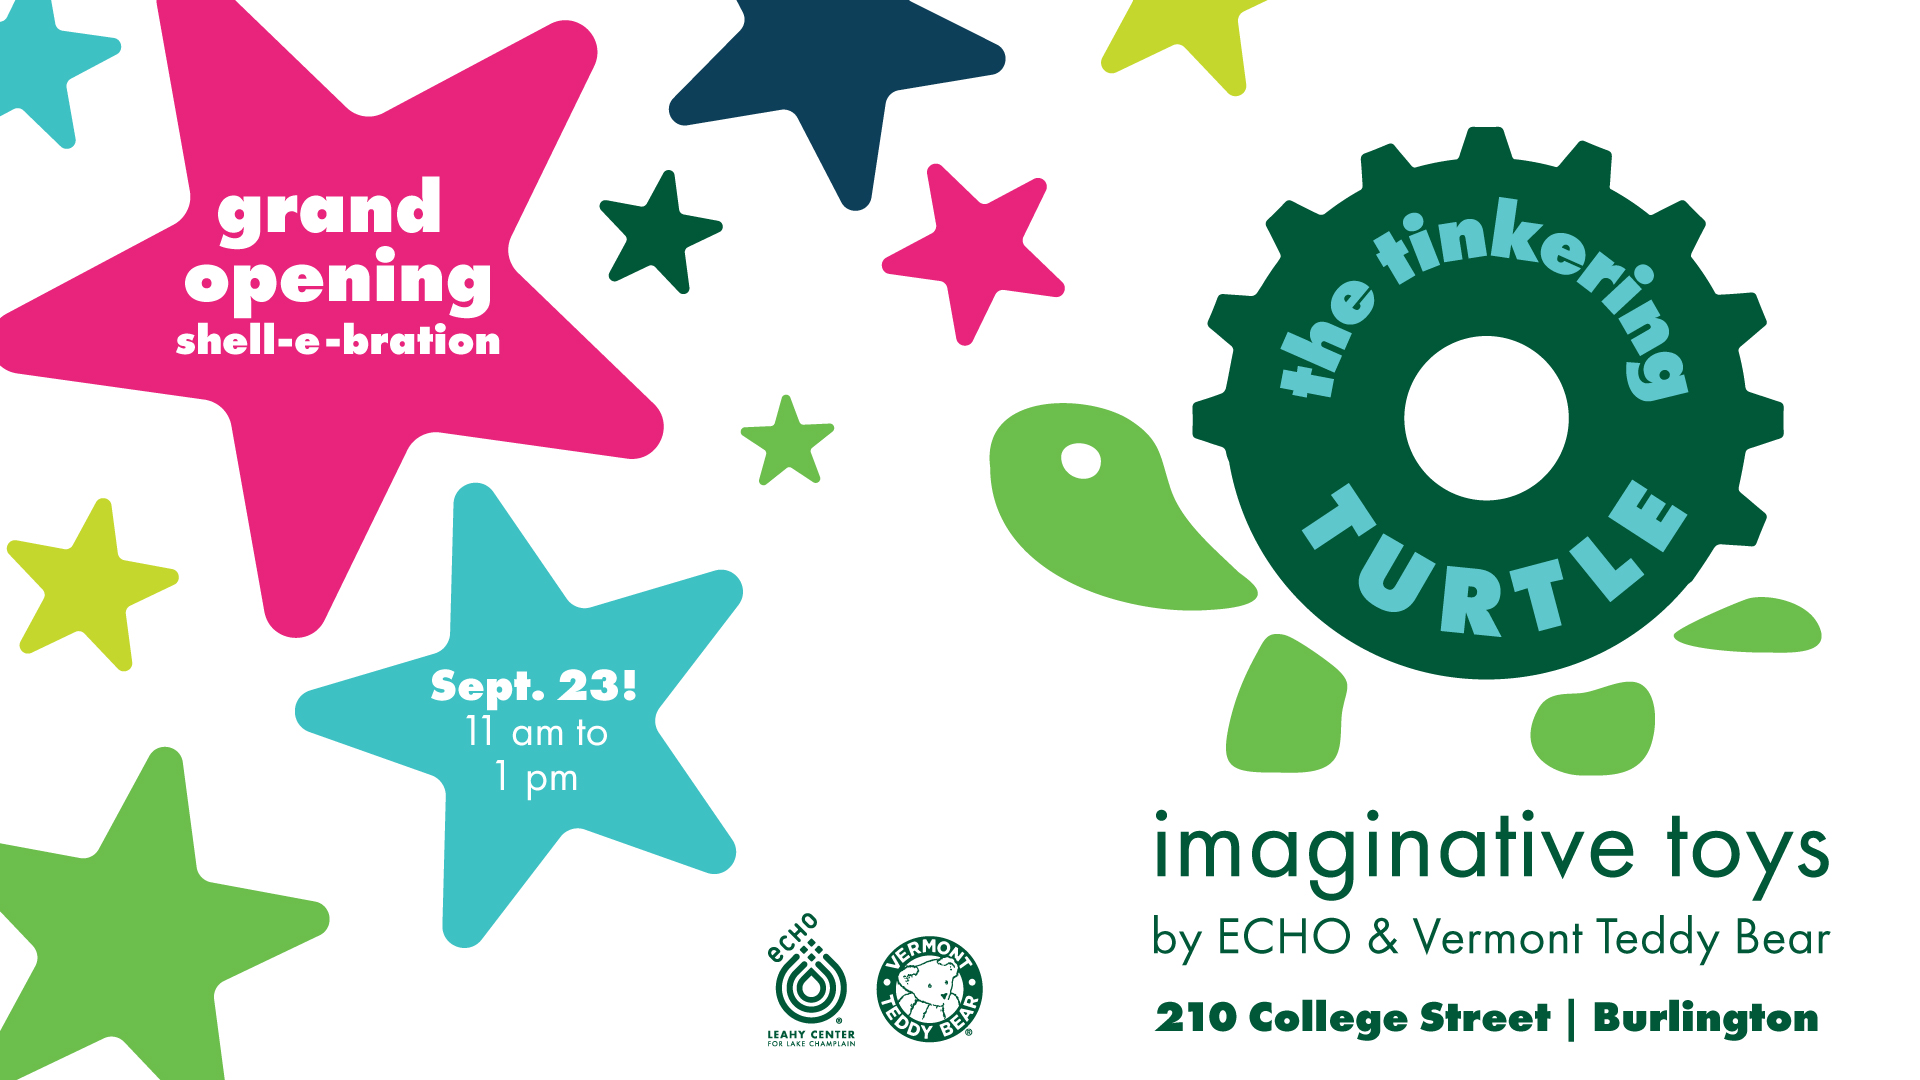 The Tinkering Turtle imaginative toys by ECHO Leahy Center for Lake Champlain and Vermont Teddy Bear, 210 College Street, Burlington, Grand opening Shell-e-bration on September 23, 11 am to 1 pm